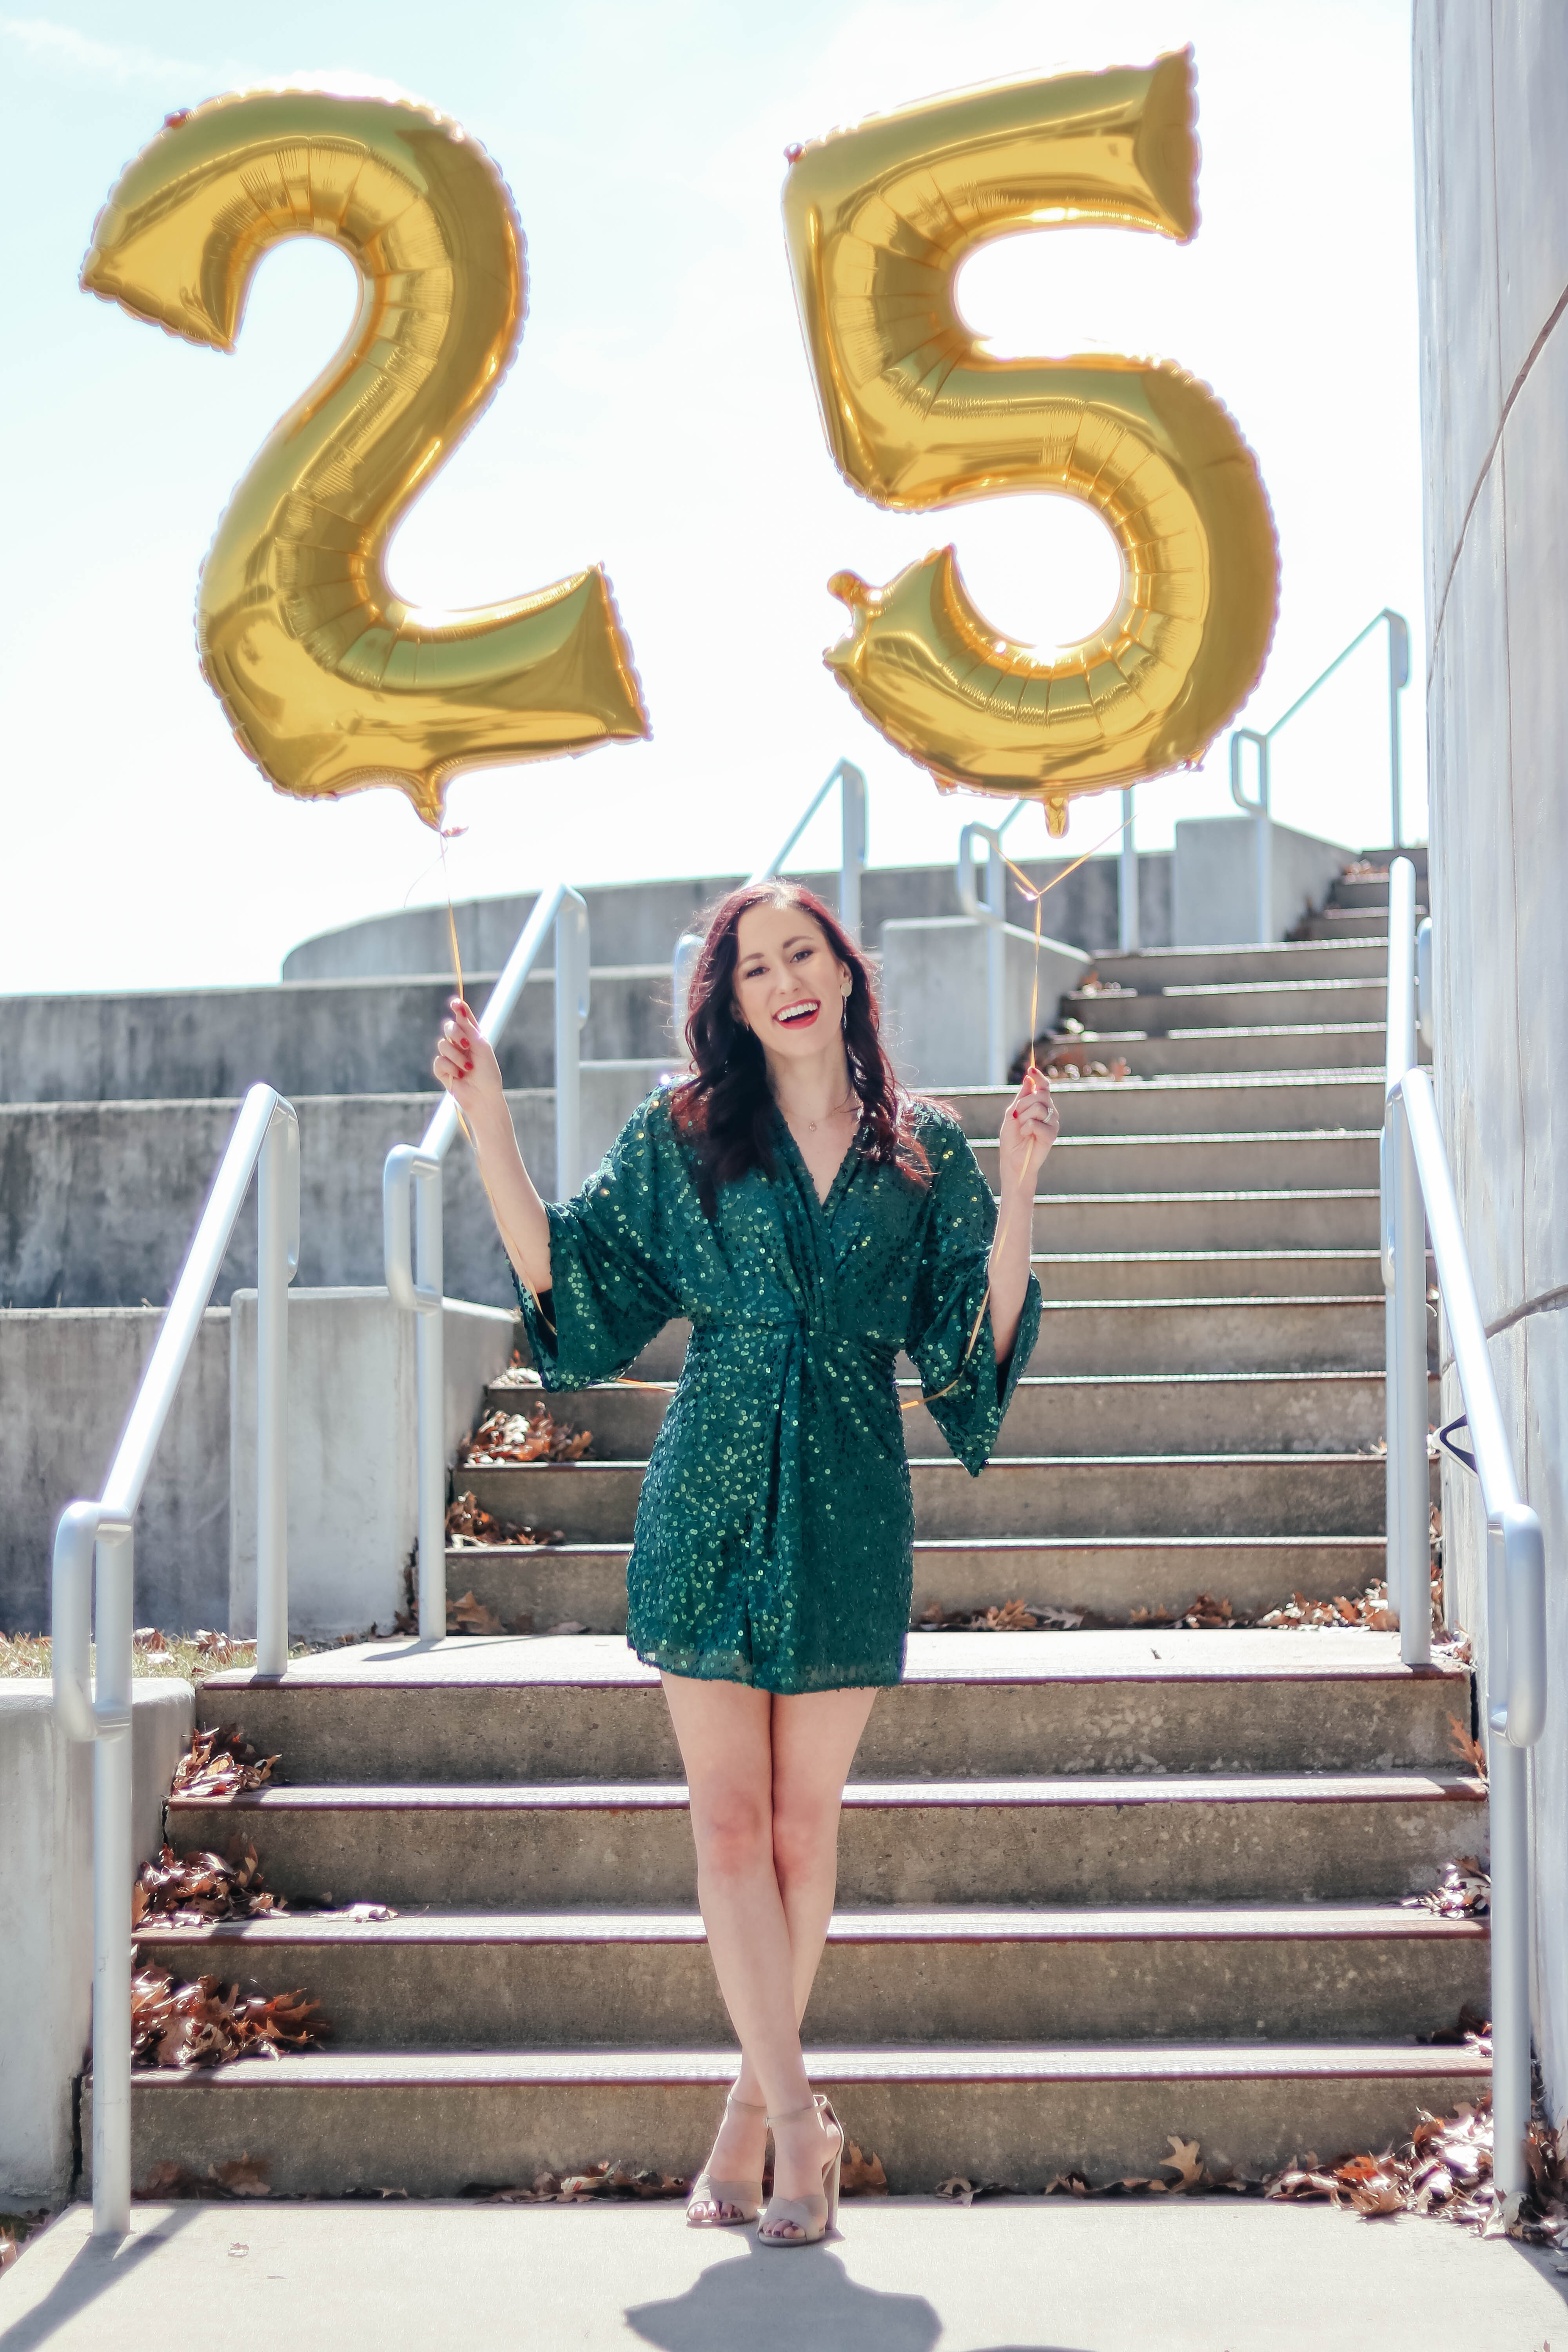 It's my 25th BIrthday! Celebrating with 25 FUN FACTS about me... (on Coming Up Roses)